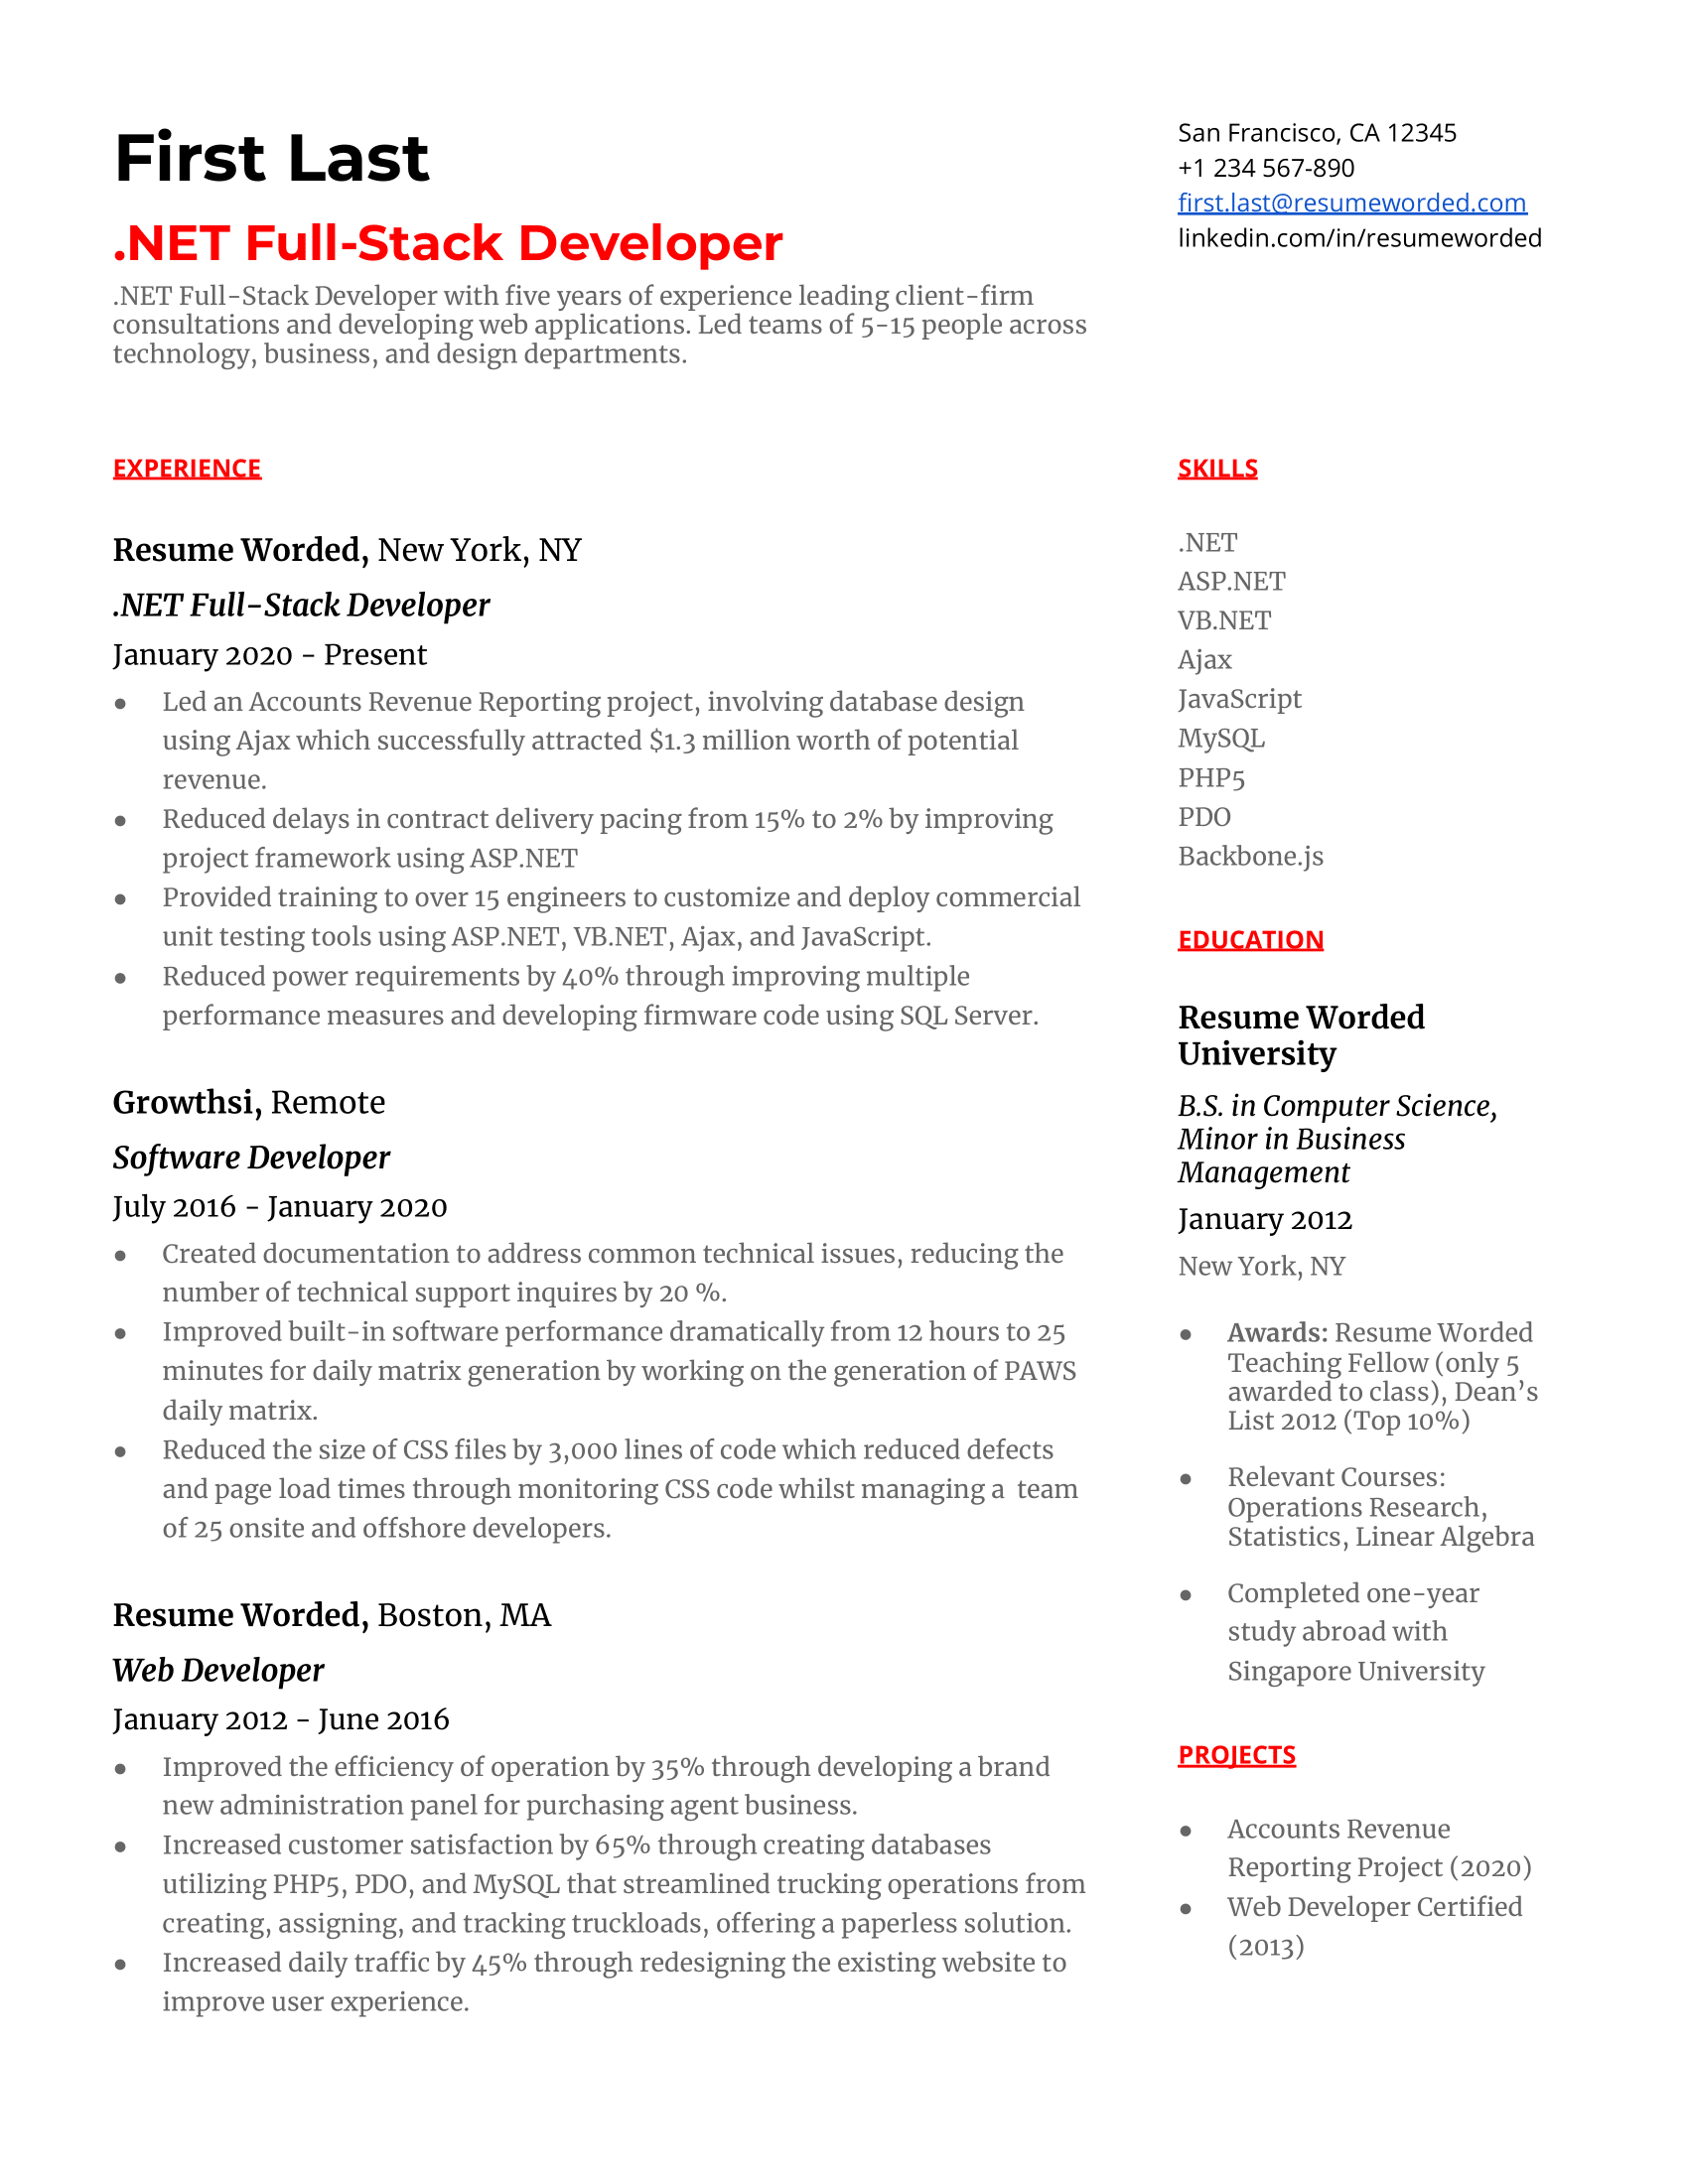 A .NET full stack developer resume that highlights relevant work experience with .NET frameworks, supplemented by hard skills, education, and projects.